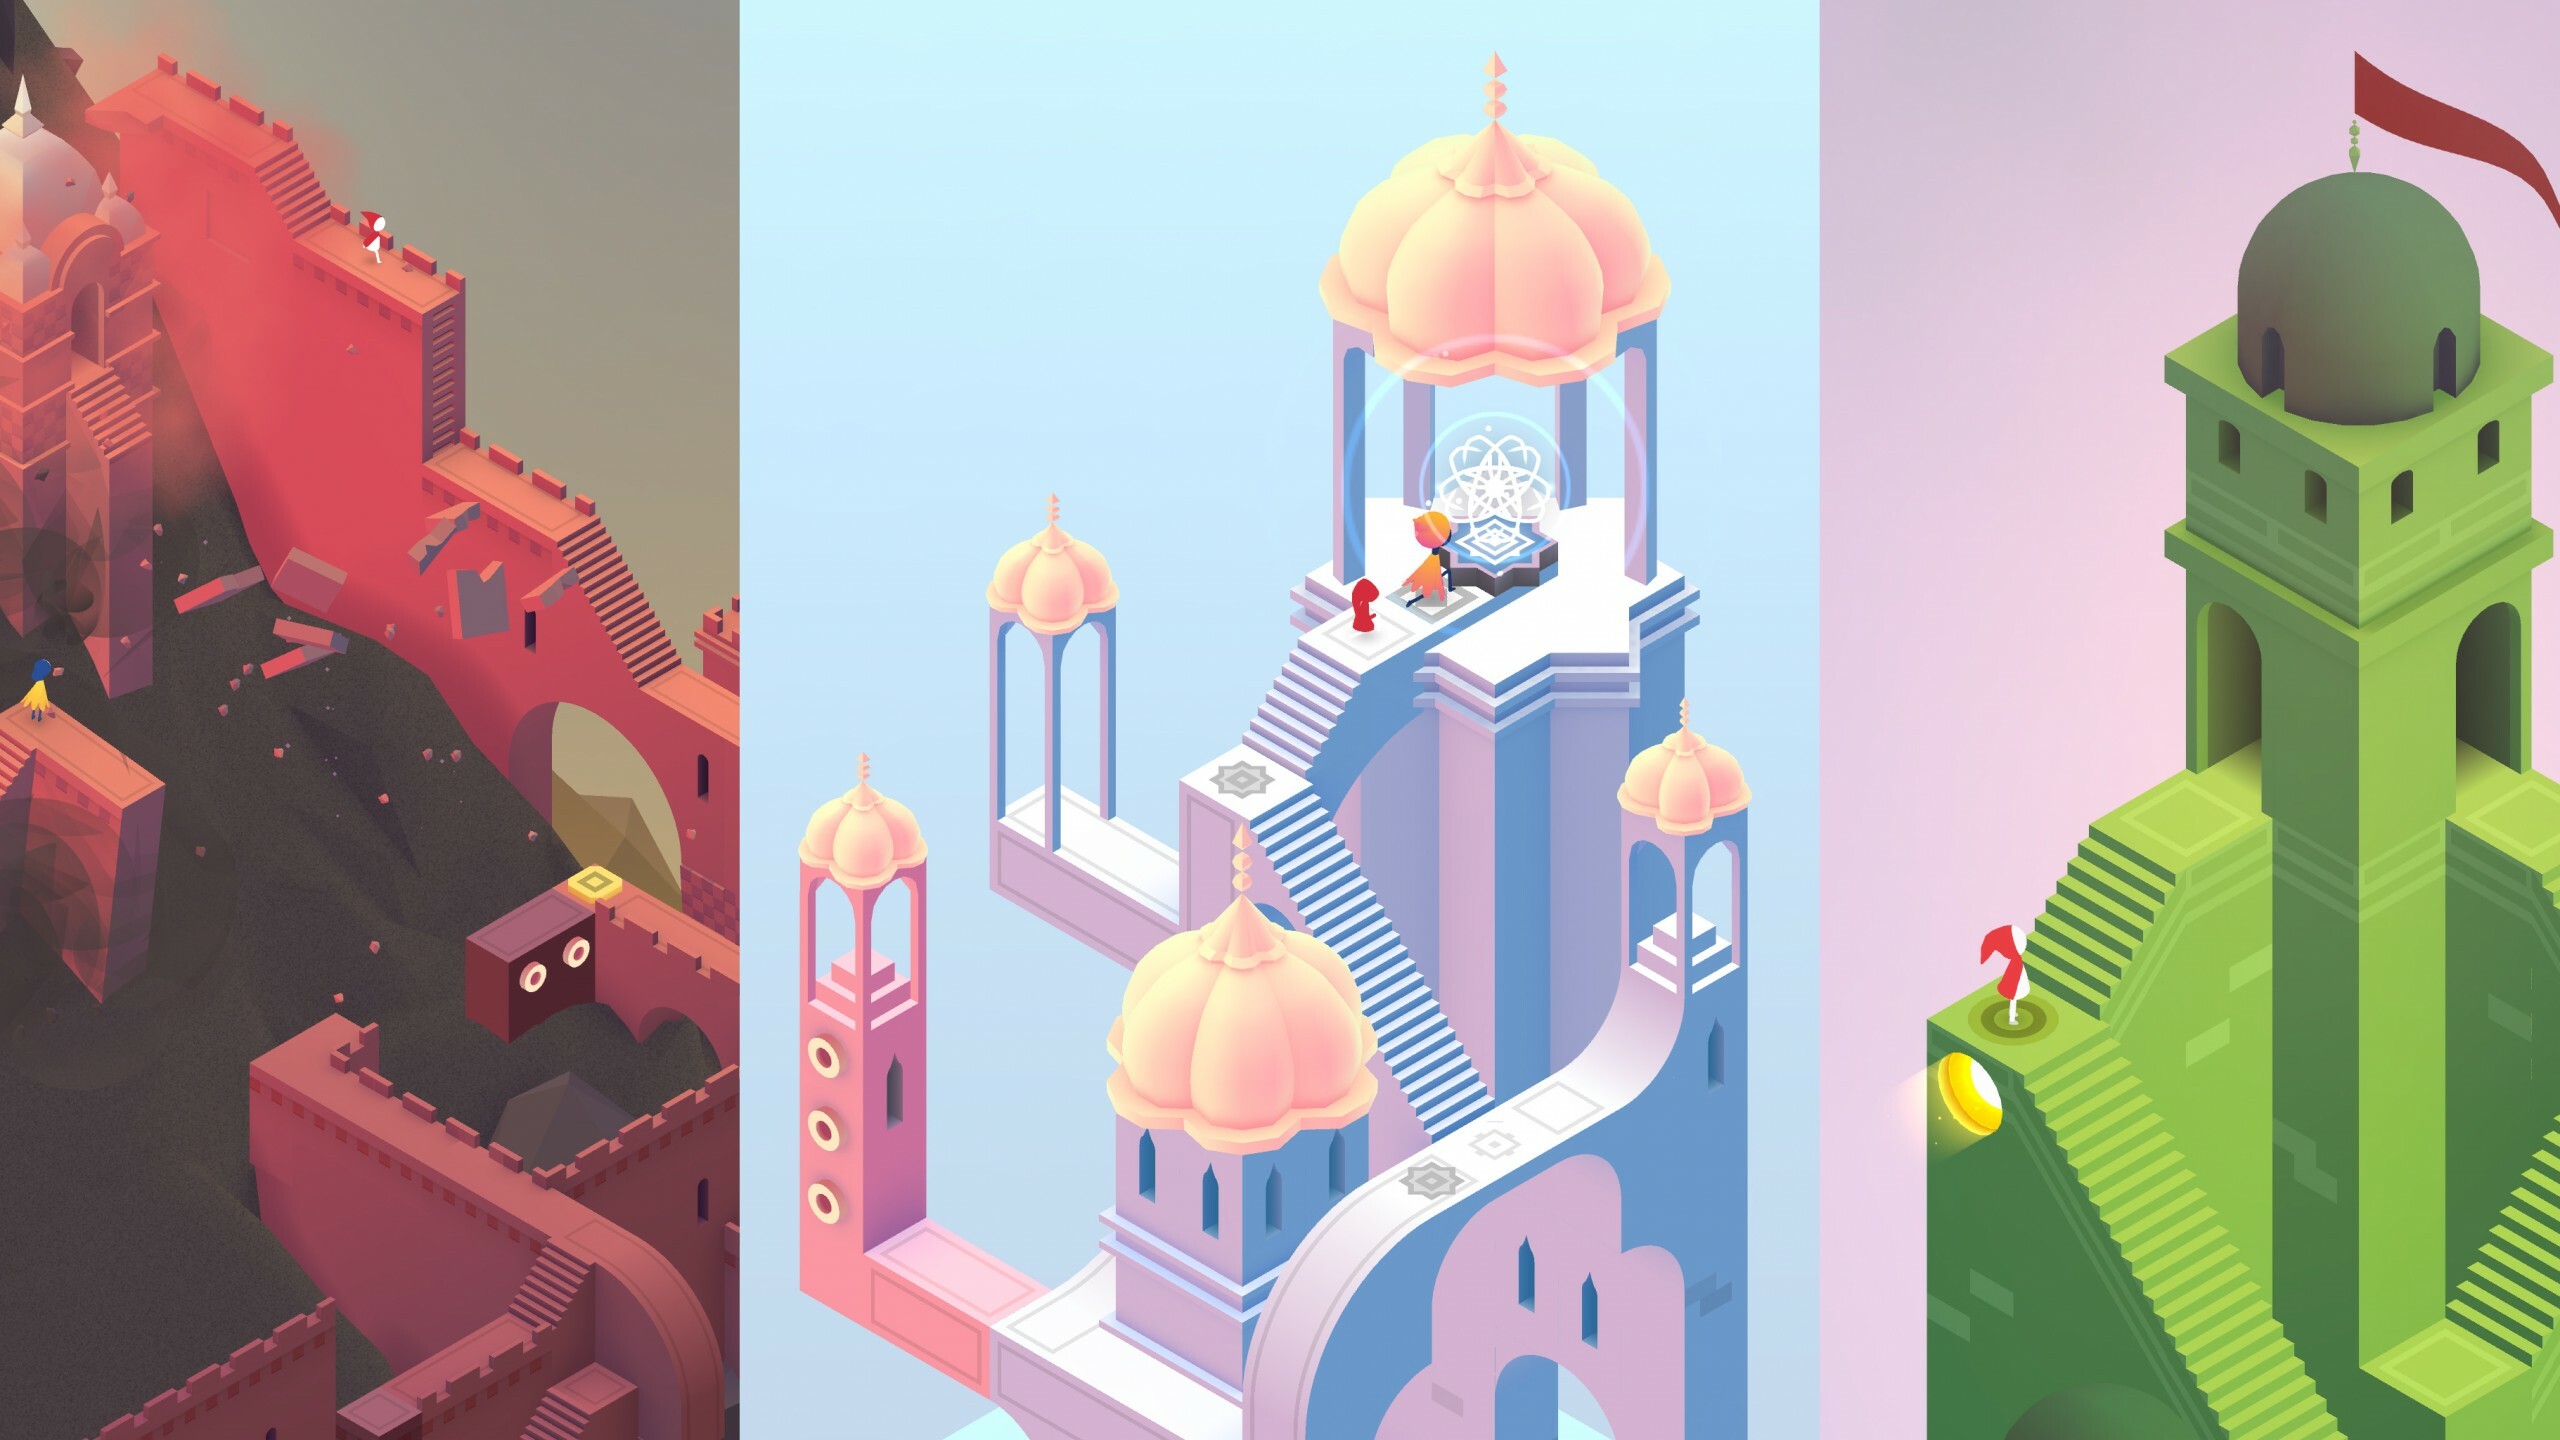 Monument Valley: Its visual style was inspired by Japanese prints, minimalist sculpture, and indie games Windosill, Fez, and Sword and Sworcery, Indie game. 2560x1440 HD Background.